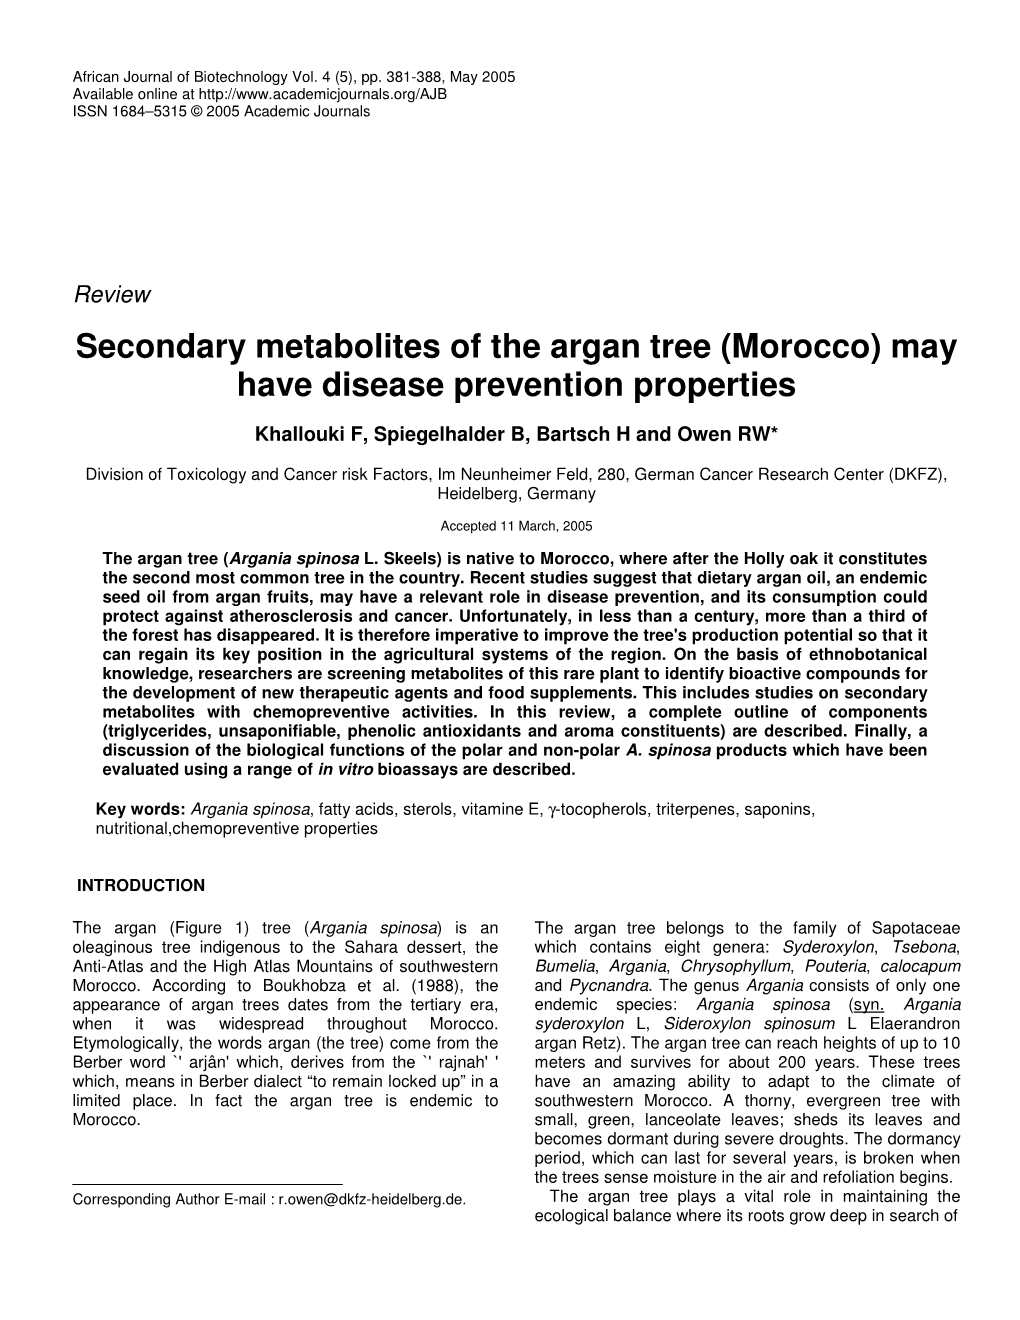 Secondary Metabolites of the Argan Tree (Morocco) May Have Disease Prevention Properties